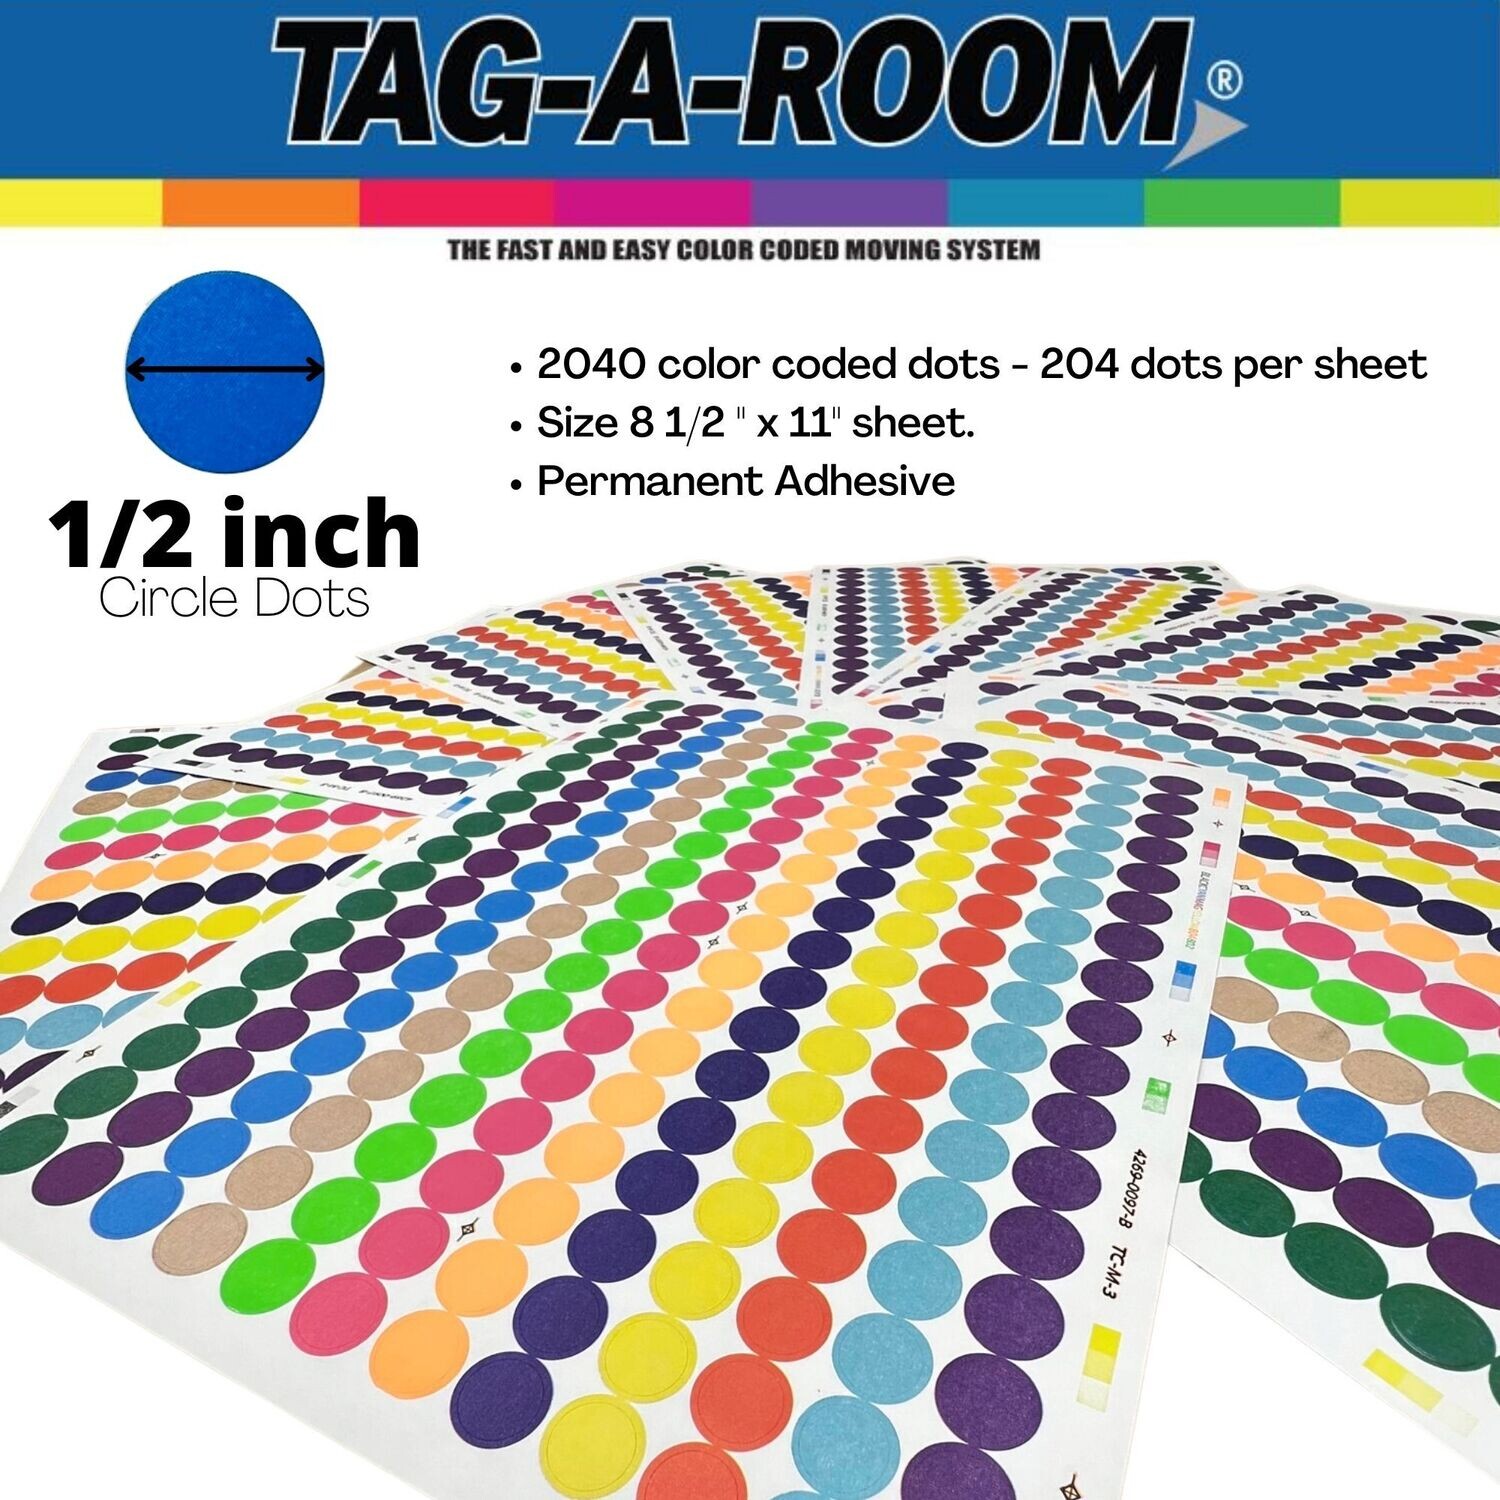 Tag-A-Room 1/2 Inch Round Color Coding Circle Dot Label Stickers 12 Bright Colors 1020 Pack 8 1/2 x 11 Sheet 